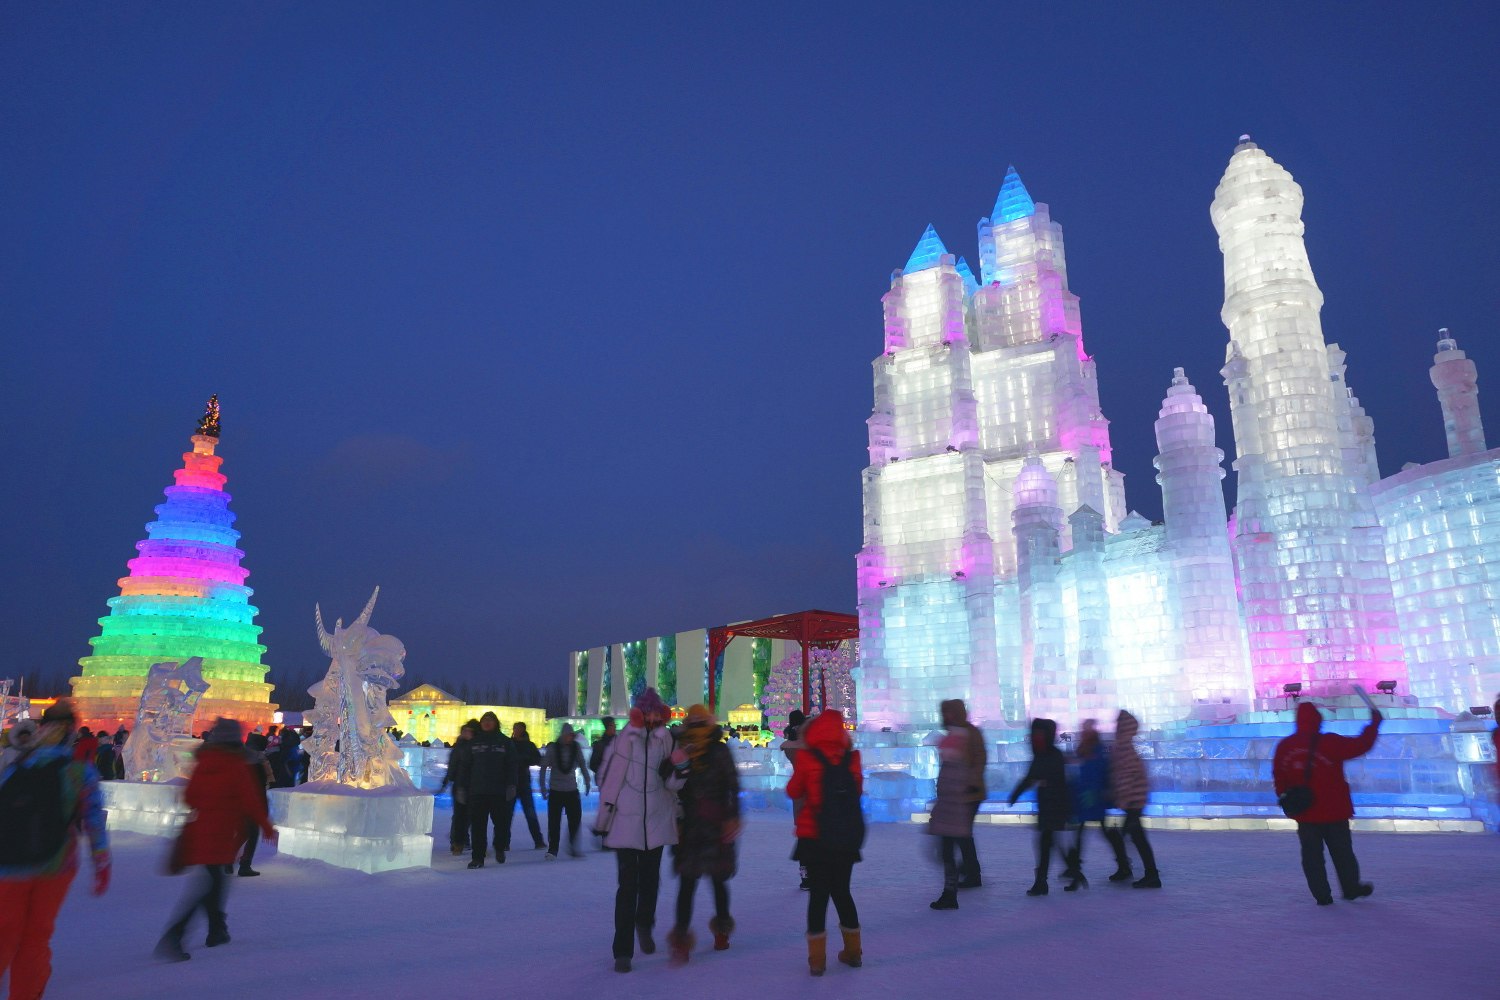 Crowds mingle around colourful ice towers within Harbin's Ice and Snow World